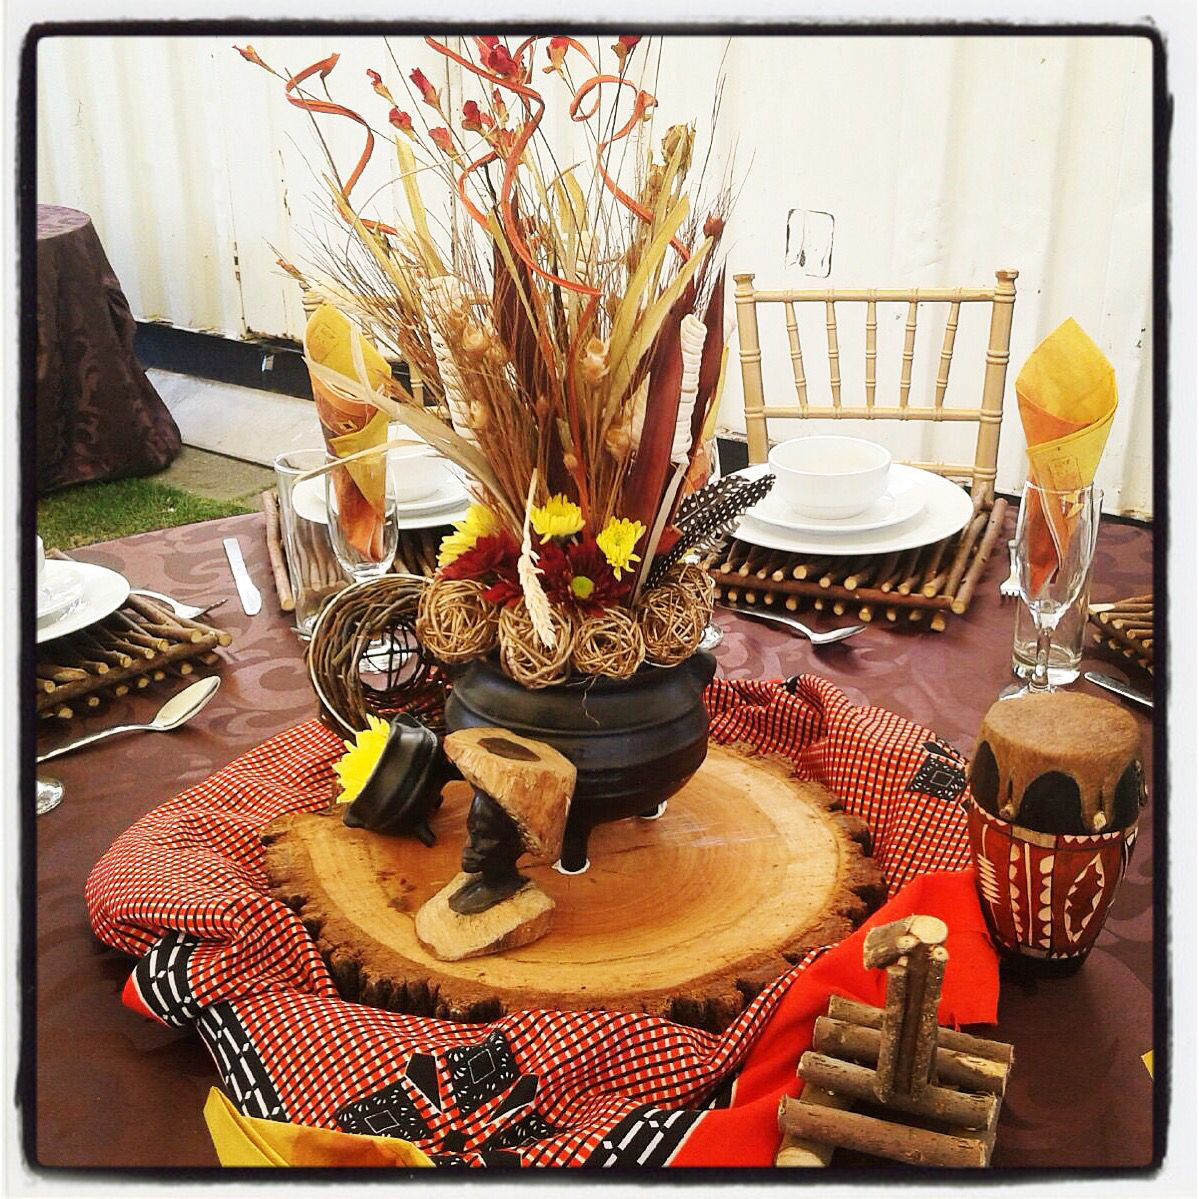 Backyard Engagement Party Decoration Ideas Africa
 Traditional African wedding centerpieces and decor